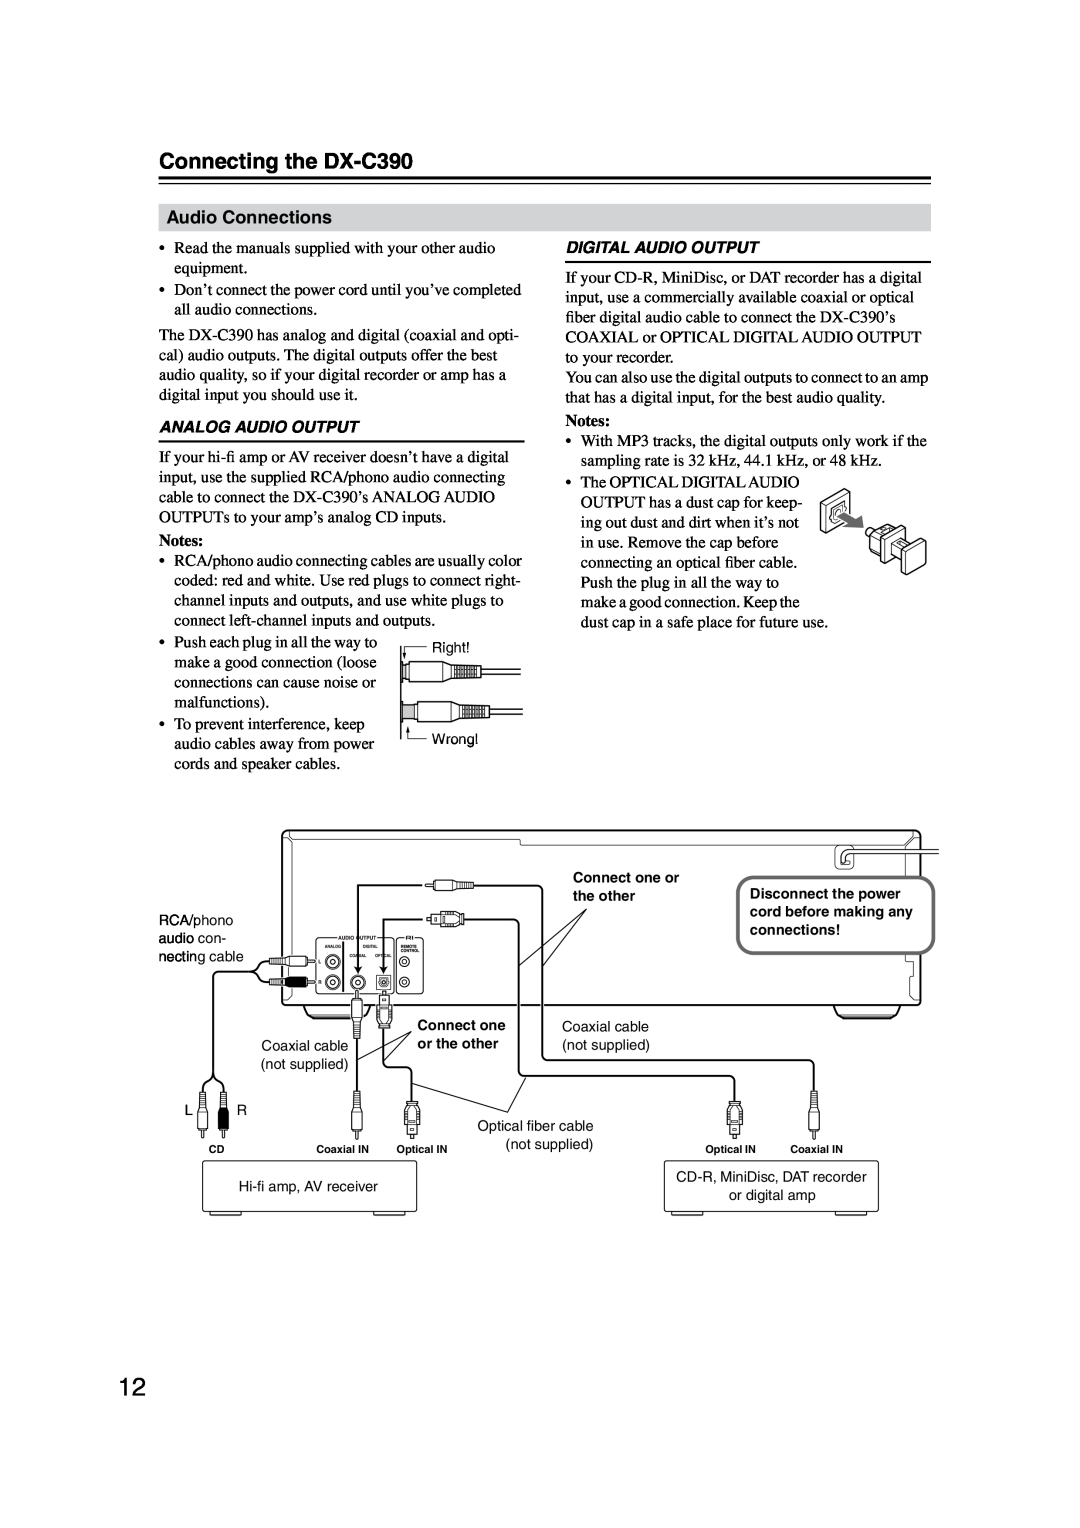 Onkyo instruction manual Connecting the DX-C390, Audio Connections, Analog Audio Output, Digital Audio Output 